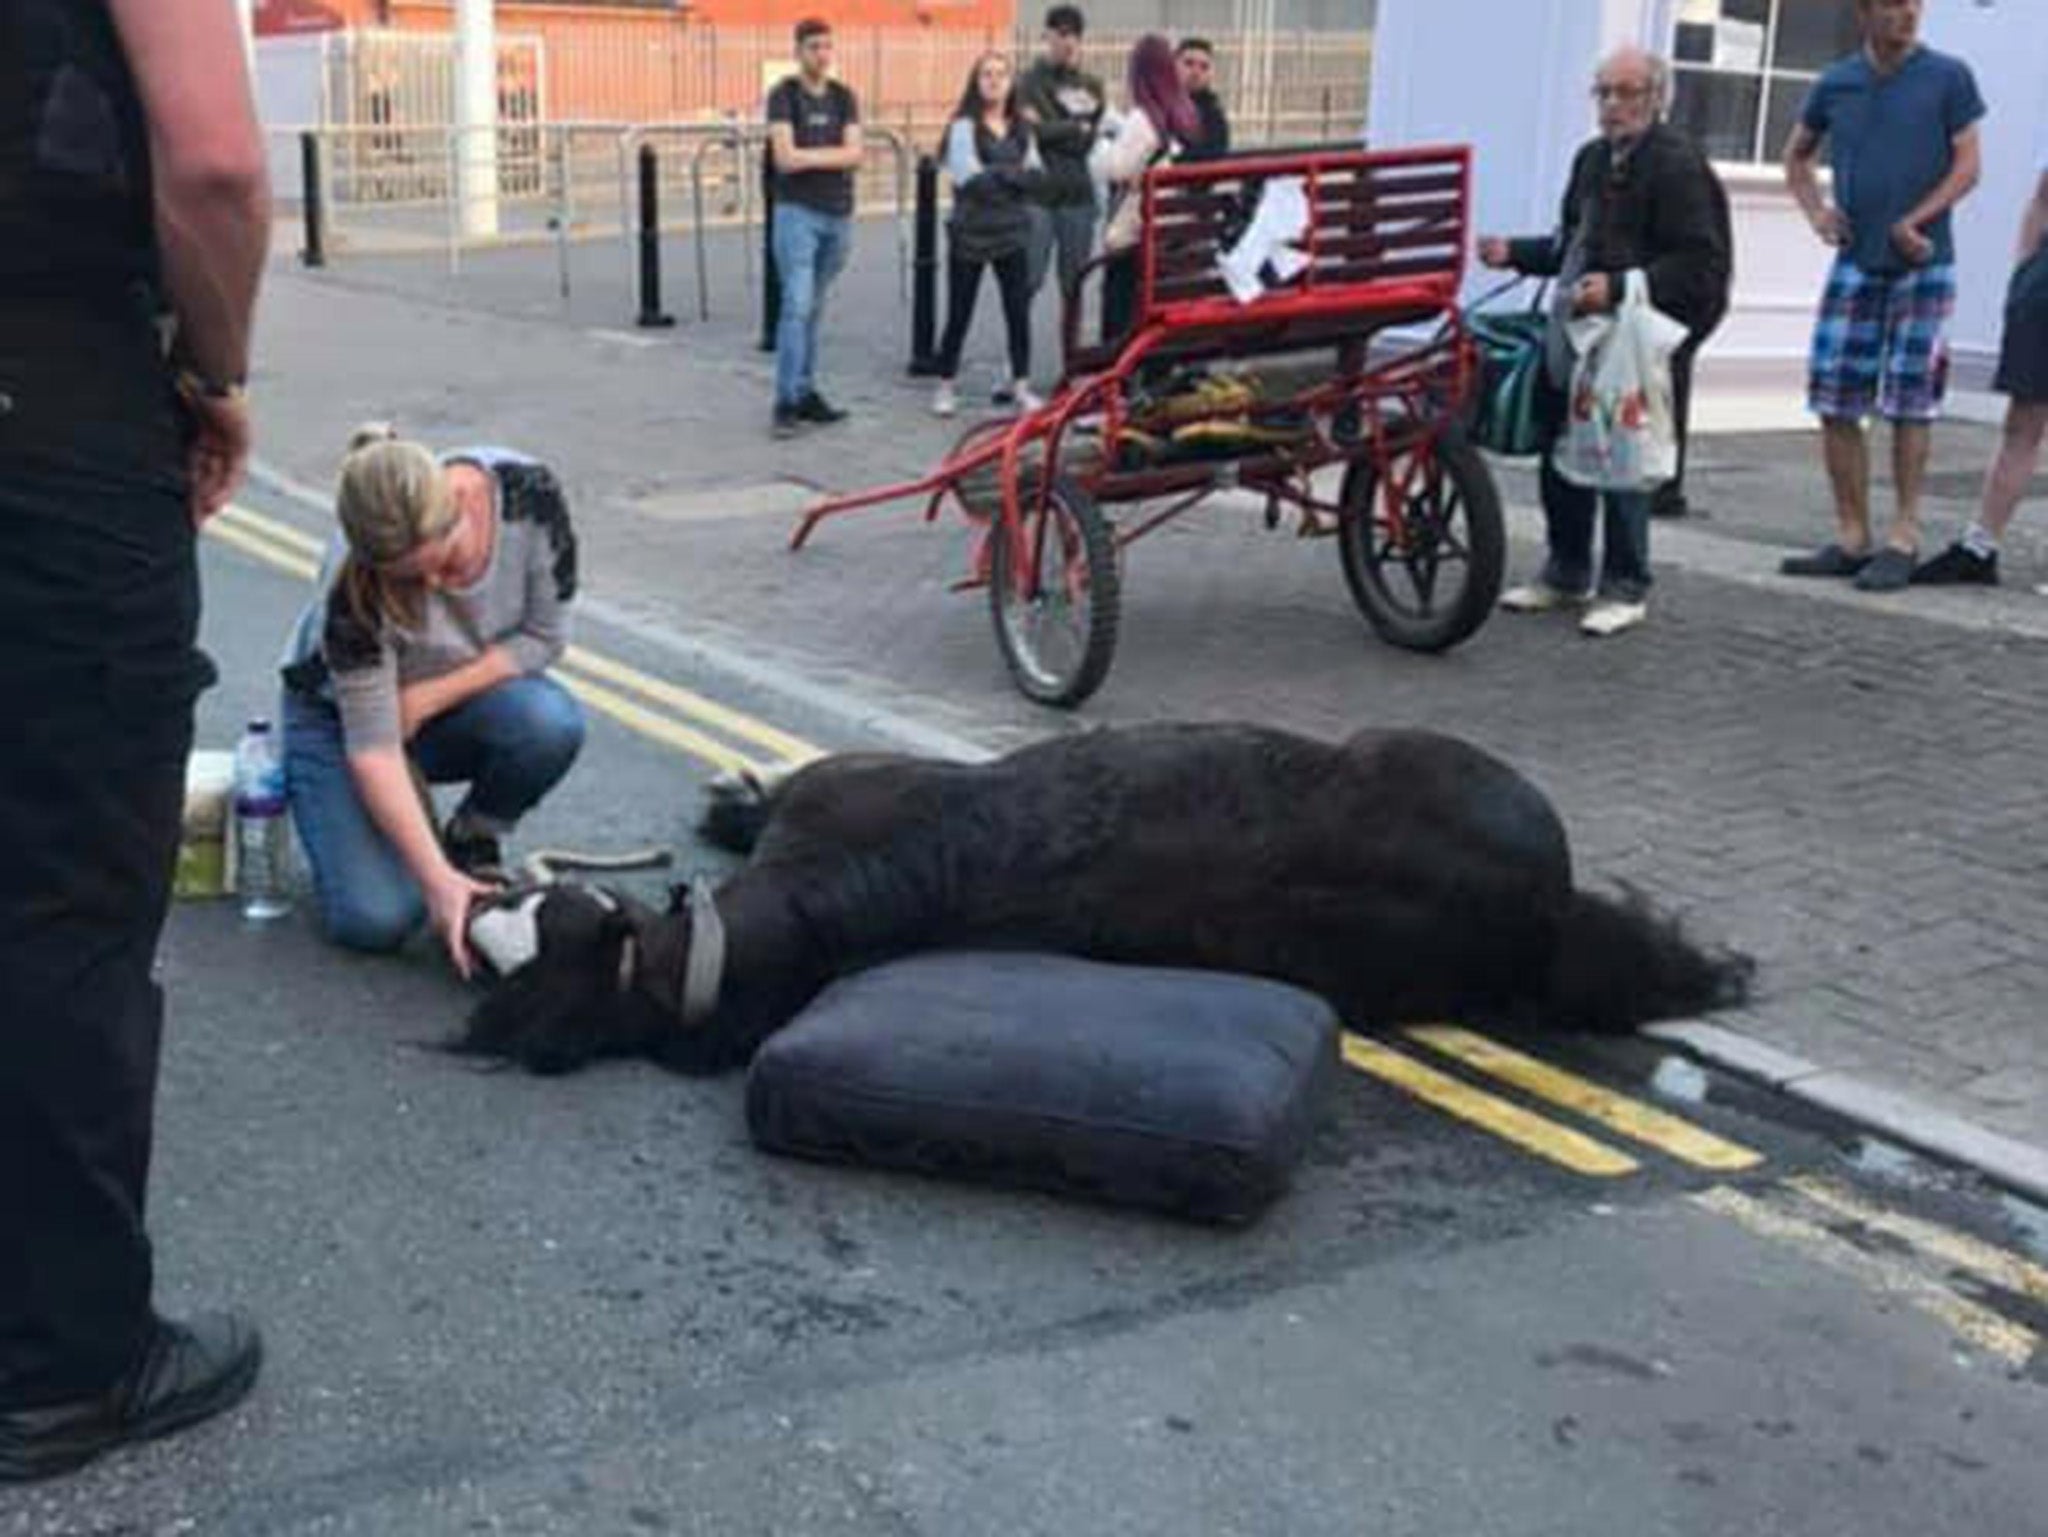 The horse is now in a stable condition at Whispering Willows Sanctuary in Pontardawe and Gowerton, South Wales